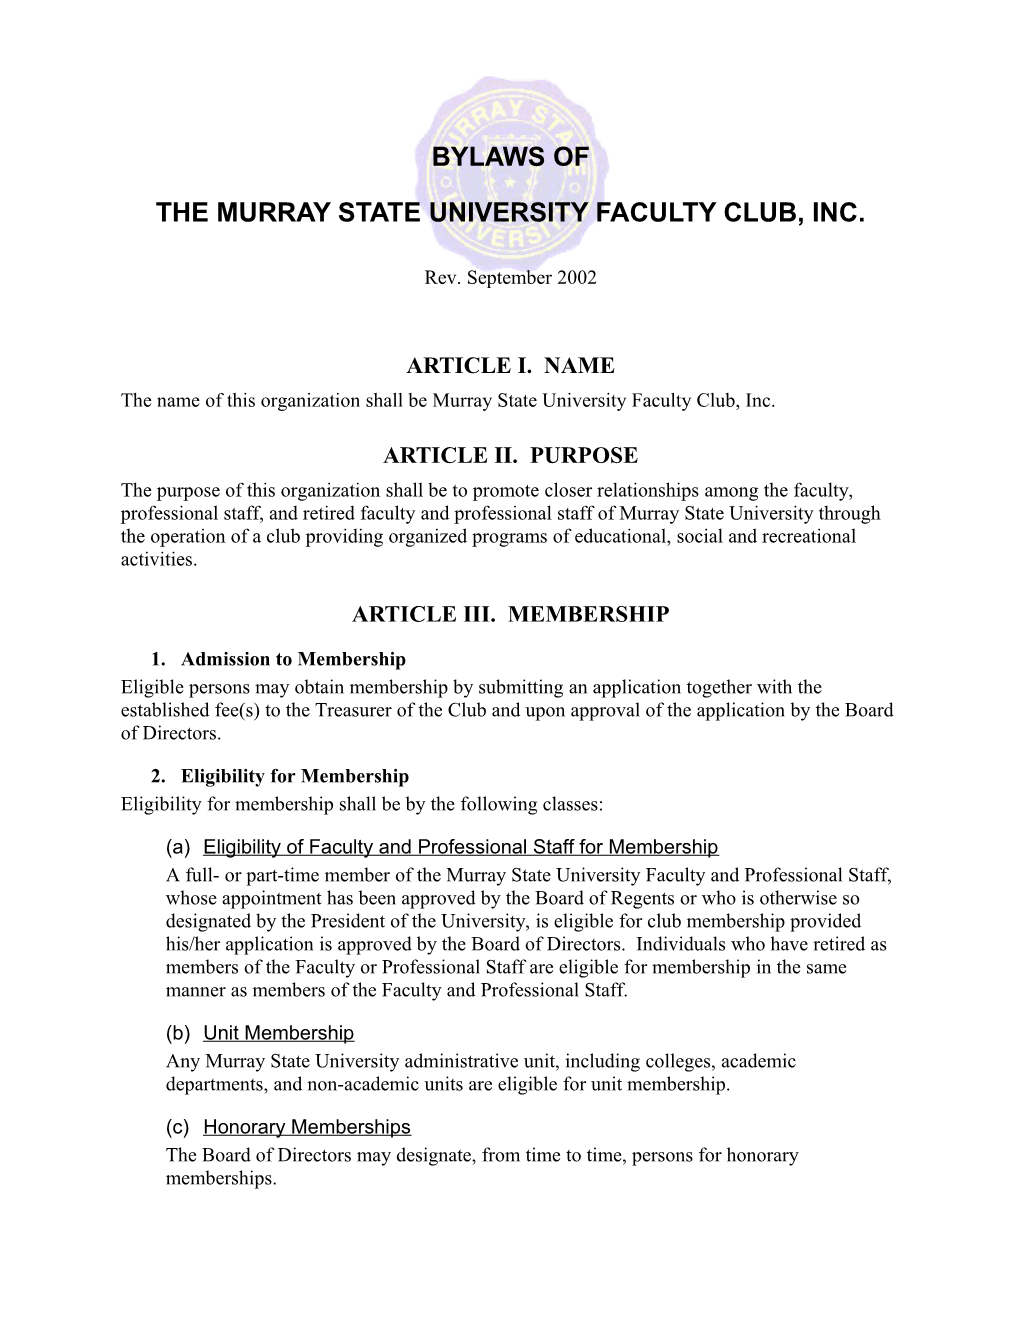 The Murray State University Faculty Club, Inc